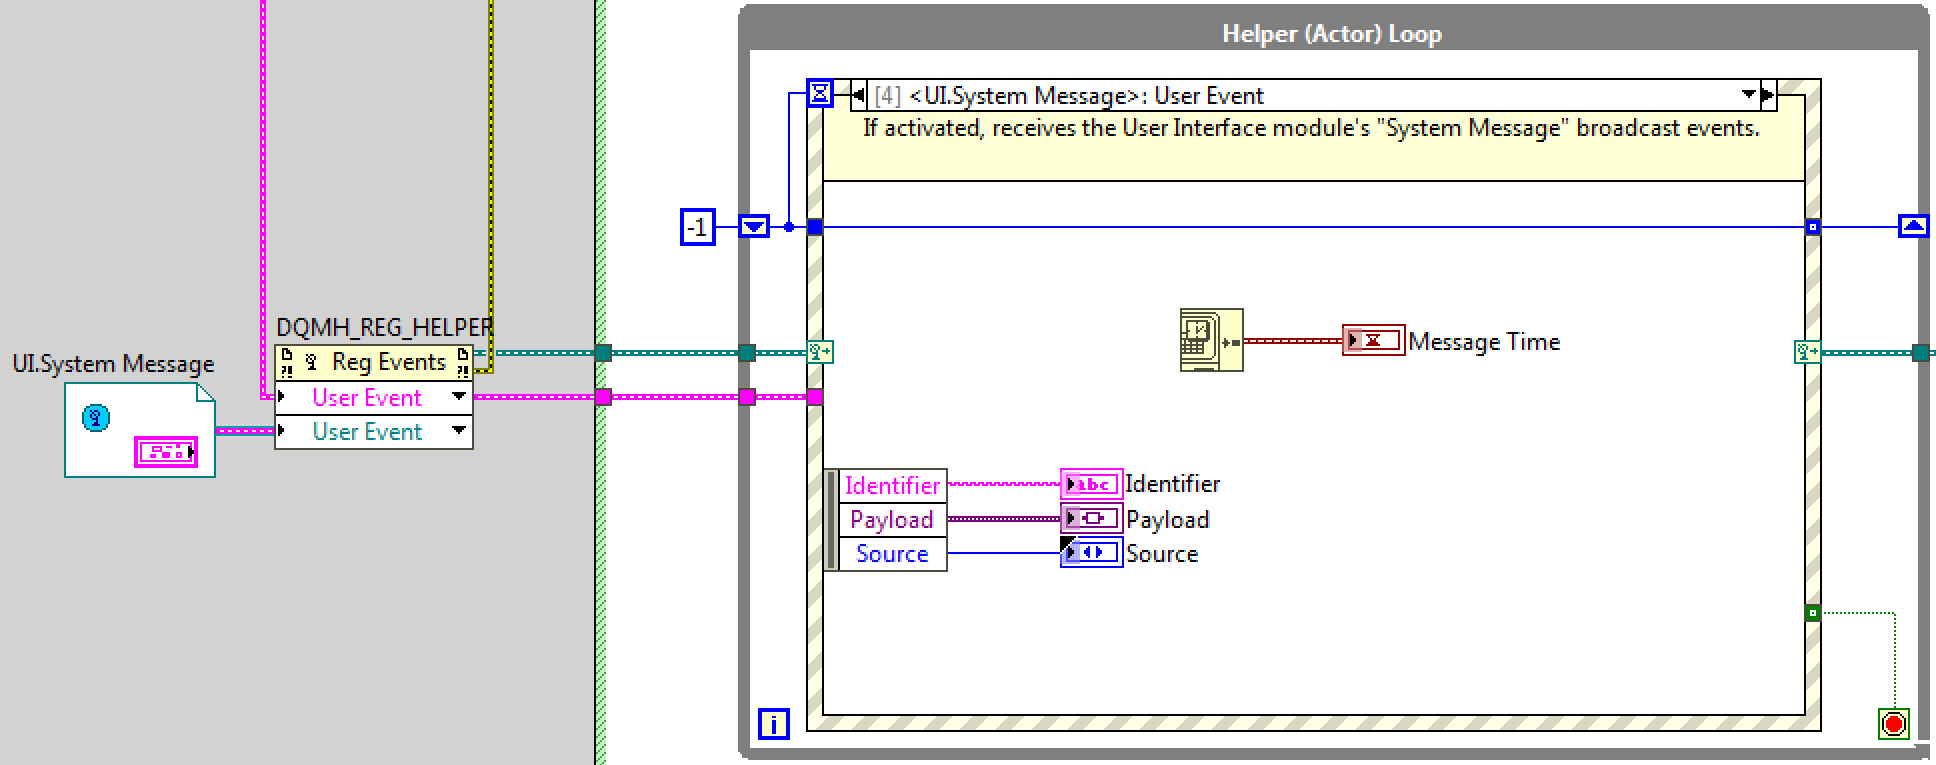 DQMH: Helper loop with event structure registered to broadcast events